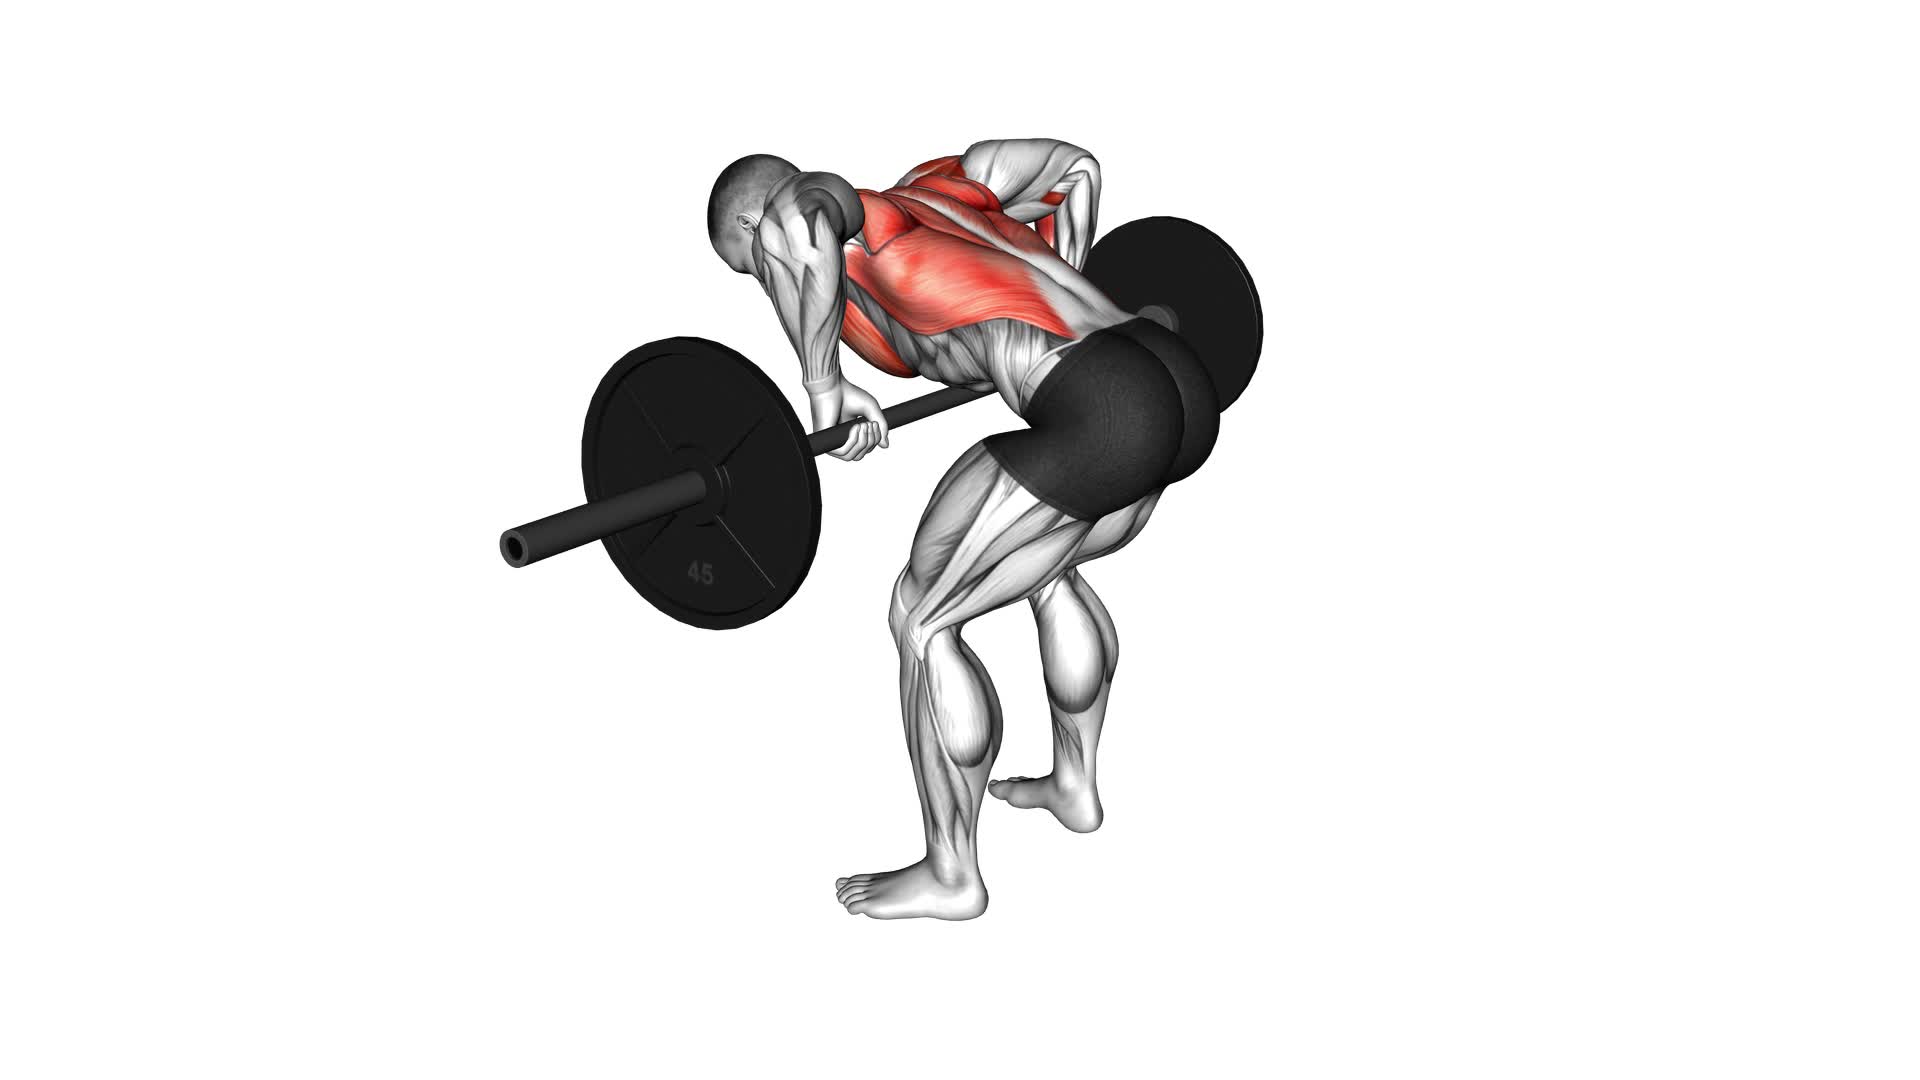 Barbell Pendlay Row - Video Exercise Guide & Tips